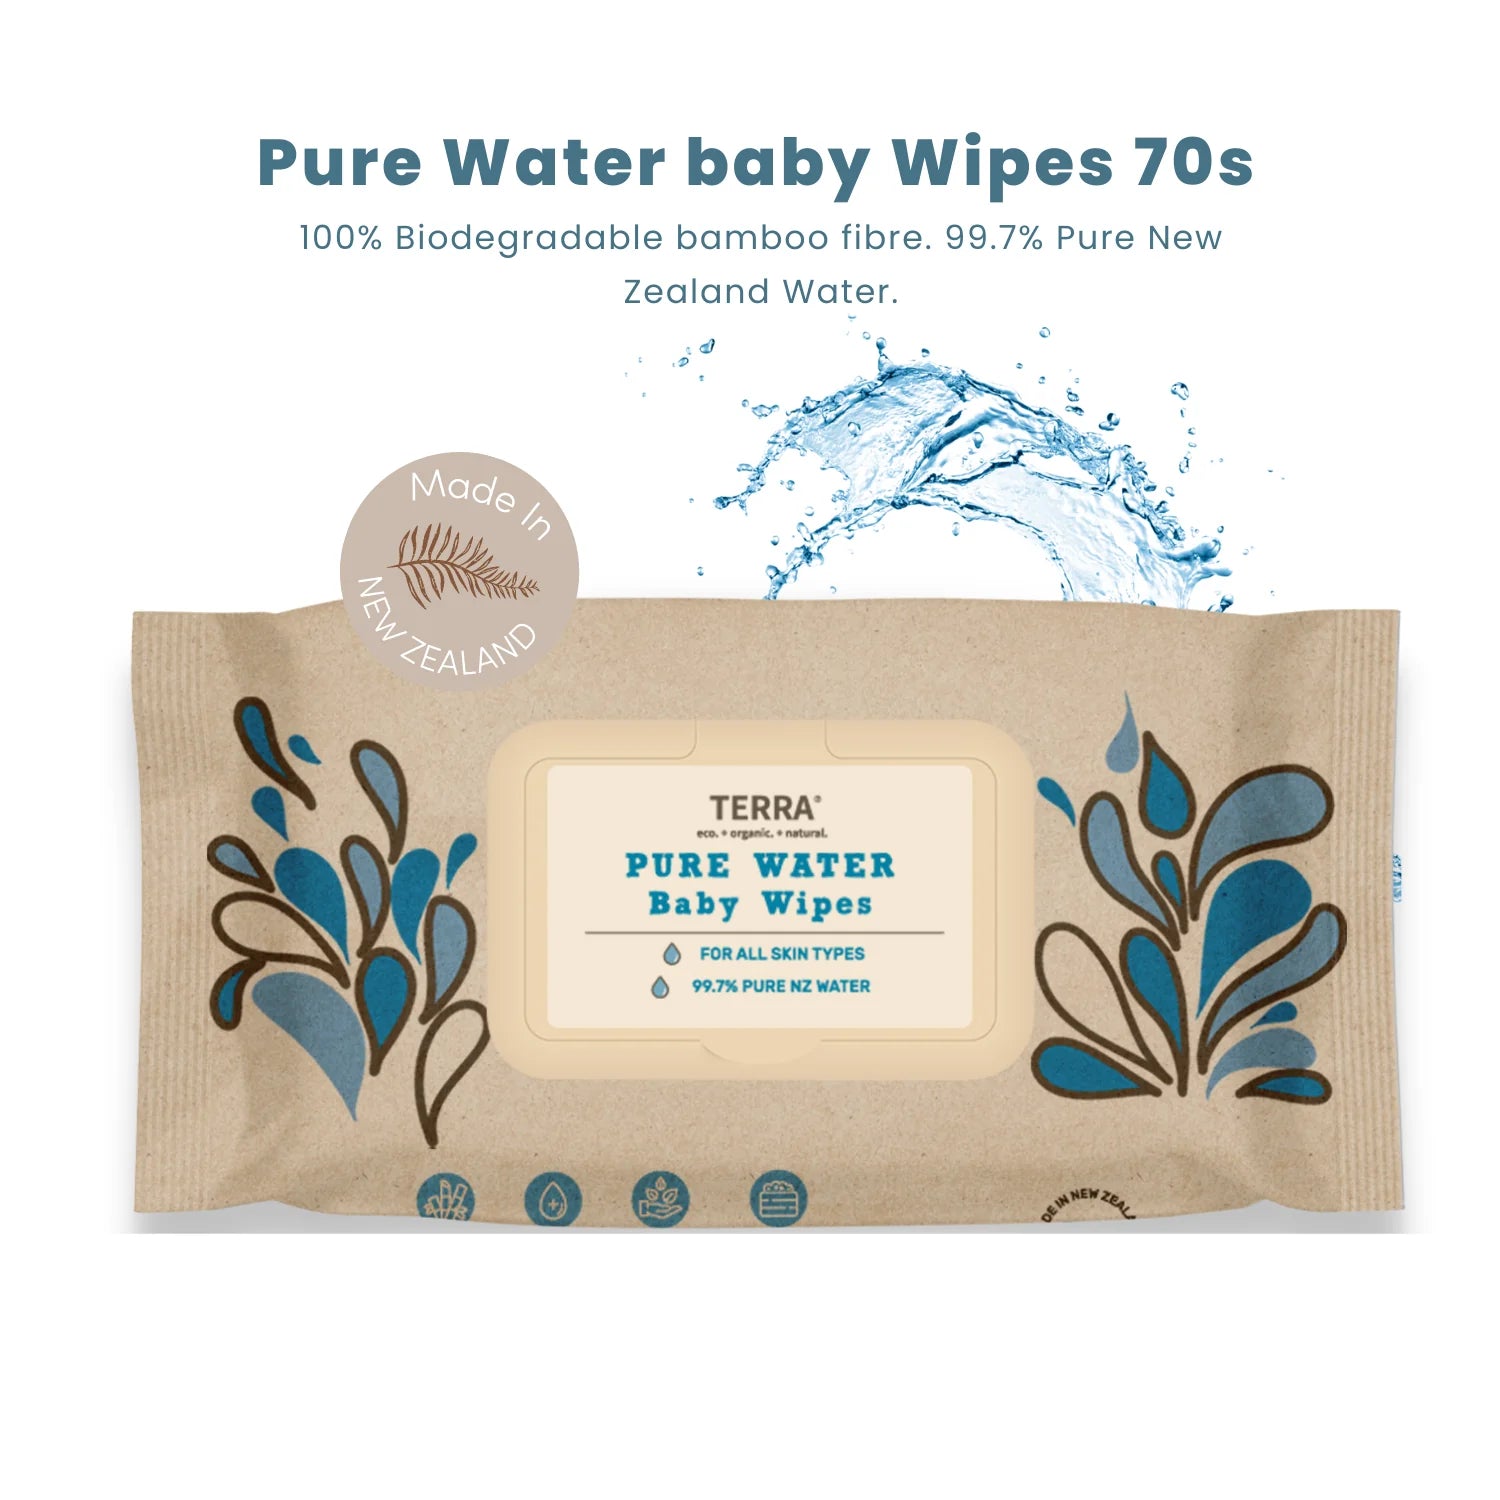 Pure Water Baby Wipes 70s - Taylorson